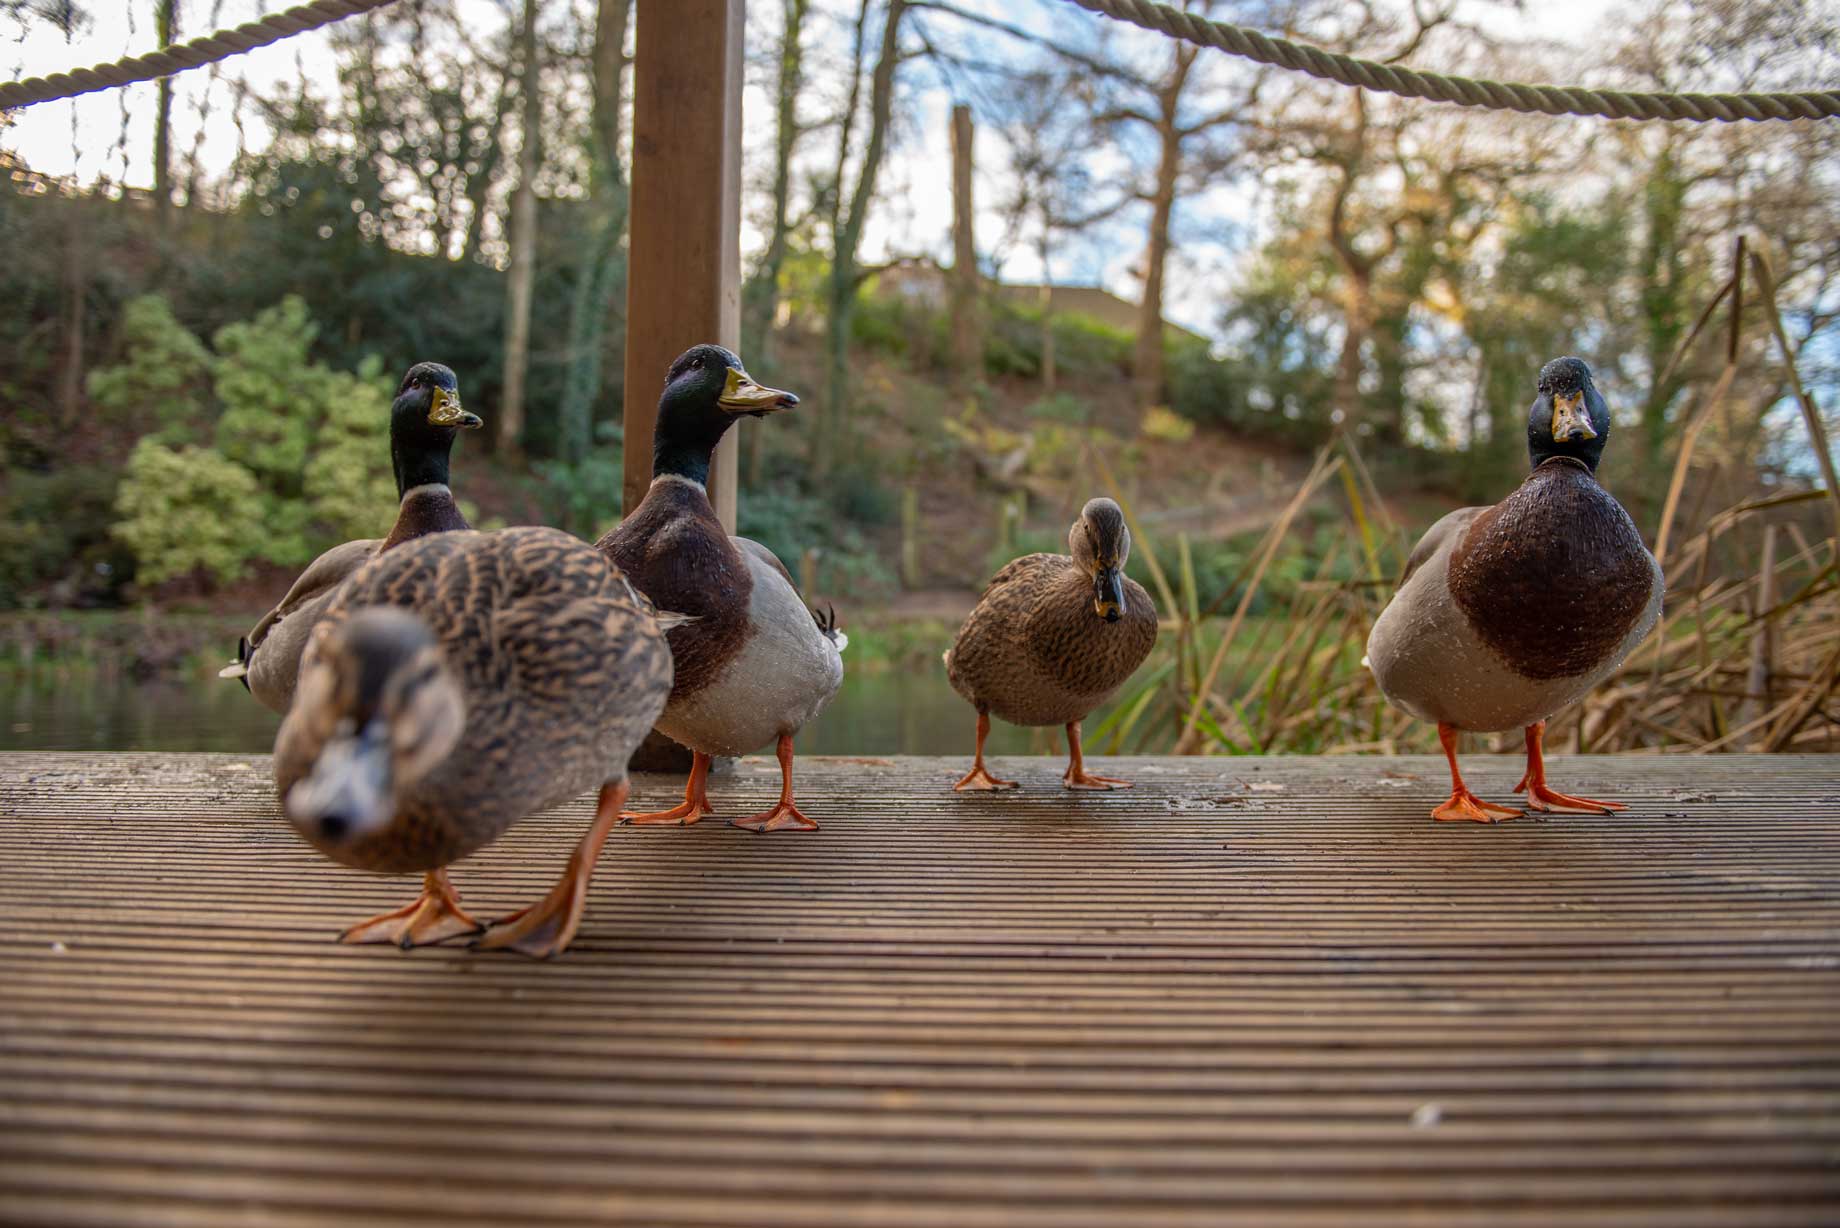 Ducks line up to say hello on a verandah in a woodland lodge